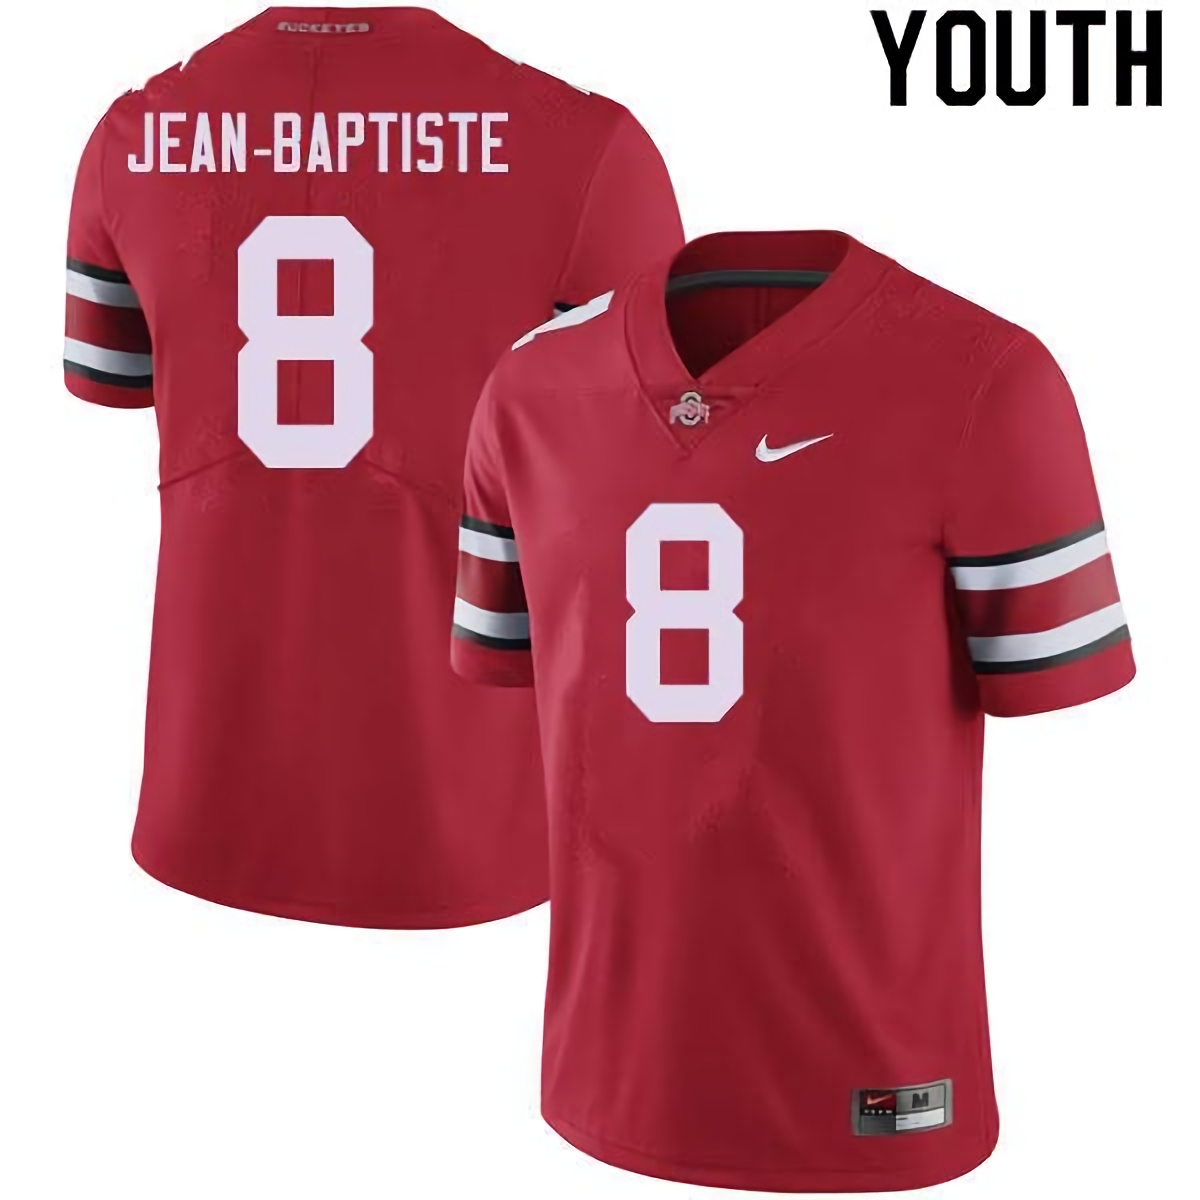 Javontae Jean-Baptiste Ohio State Buckeyes Youth NCAA #8 Nike Red College Stitched Football Jersey DNZ7456VZ